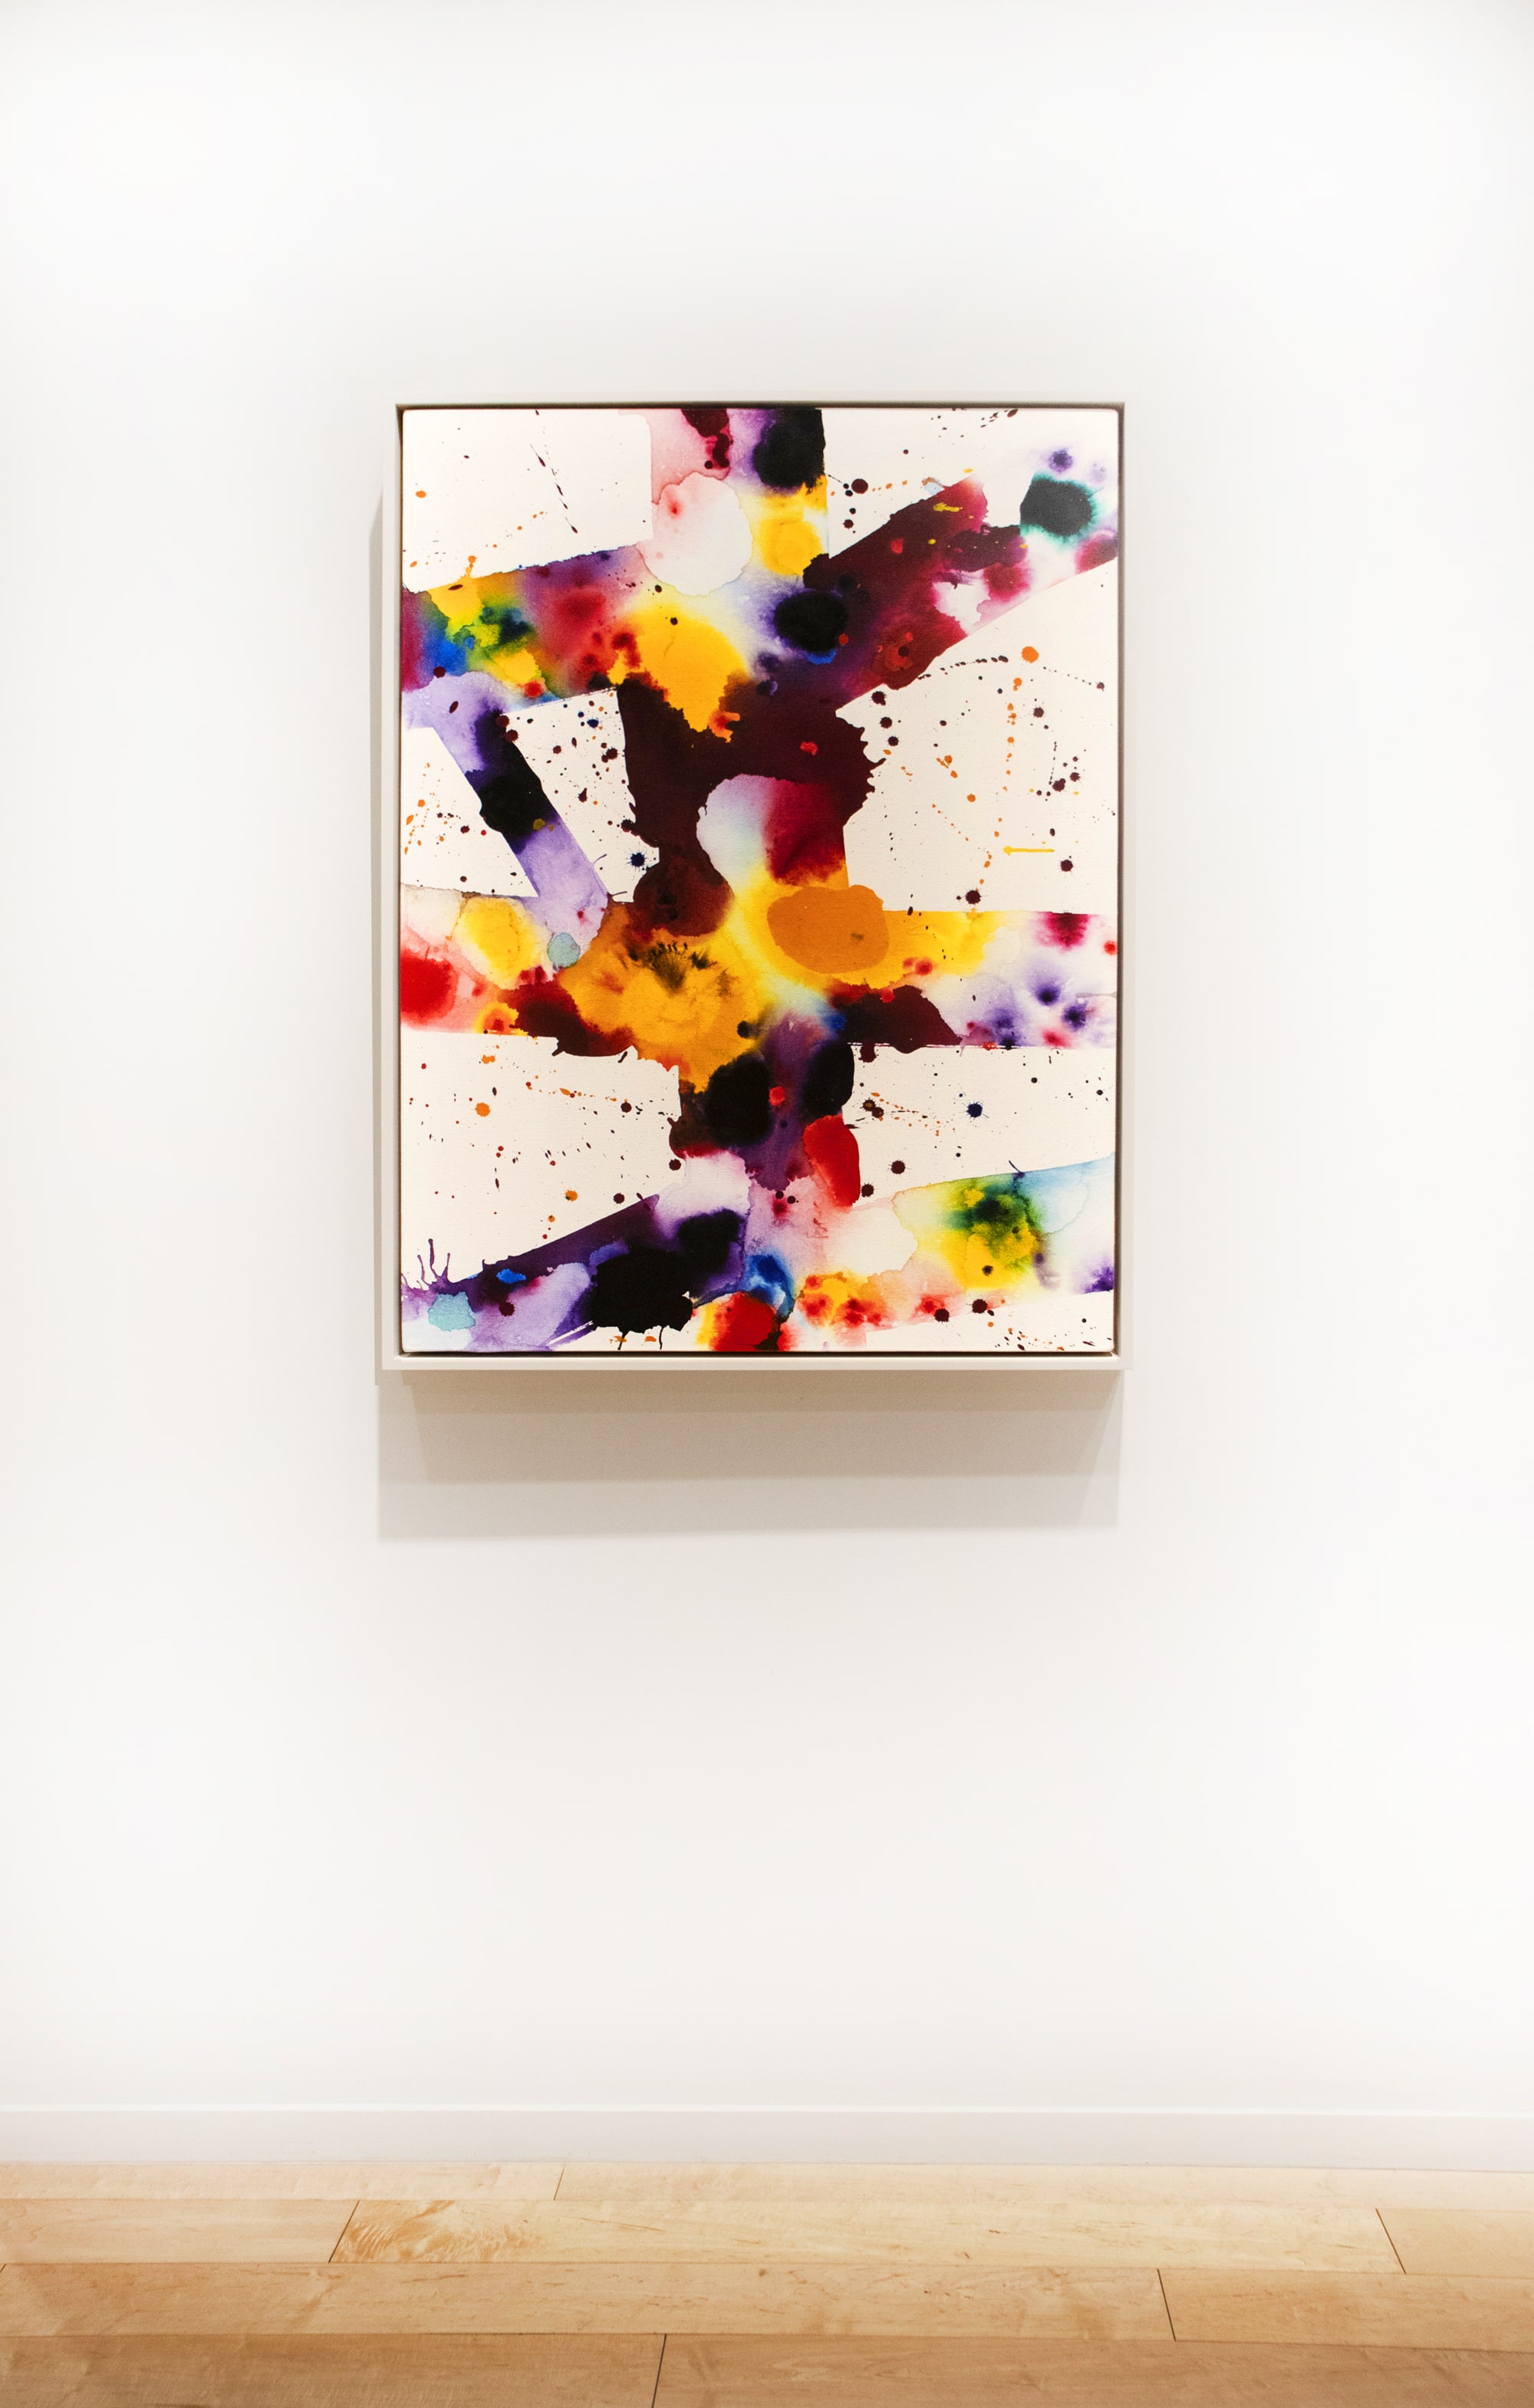 A work by Sam Francis from 1973. Acrylic and oil on canvas.